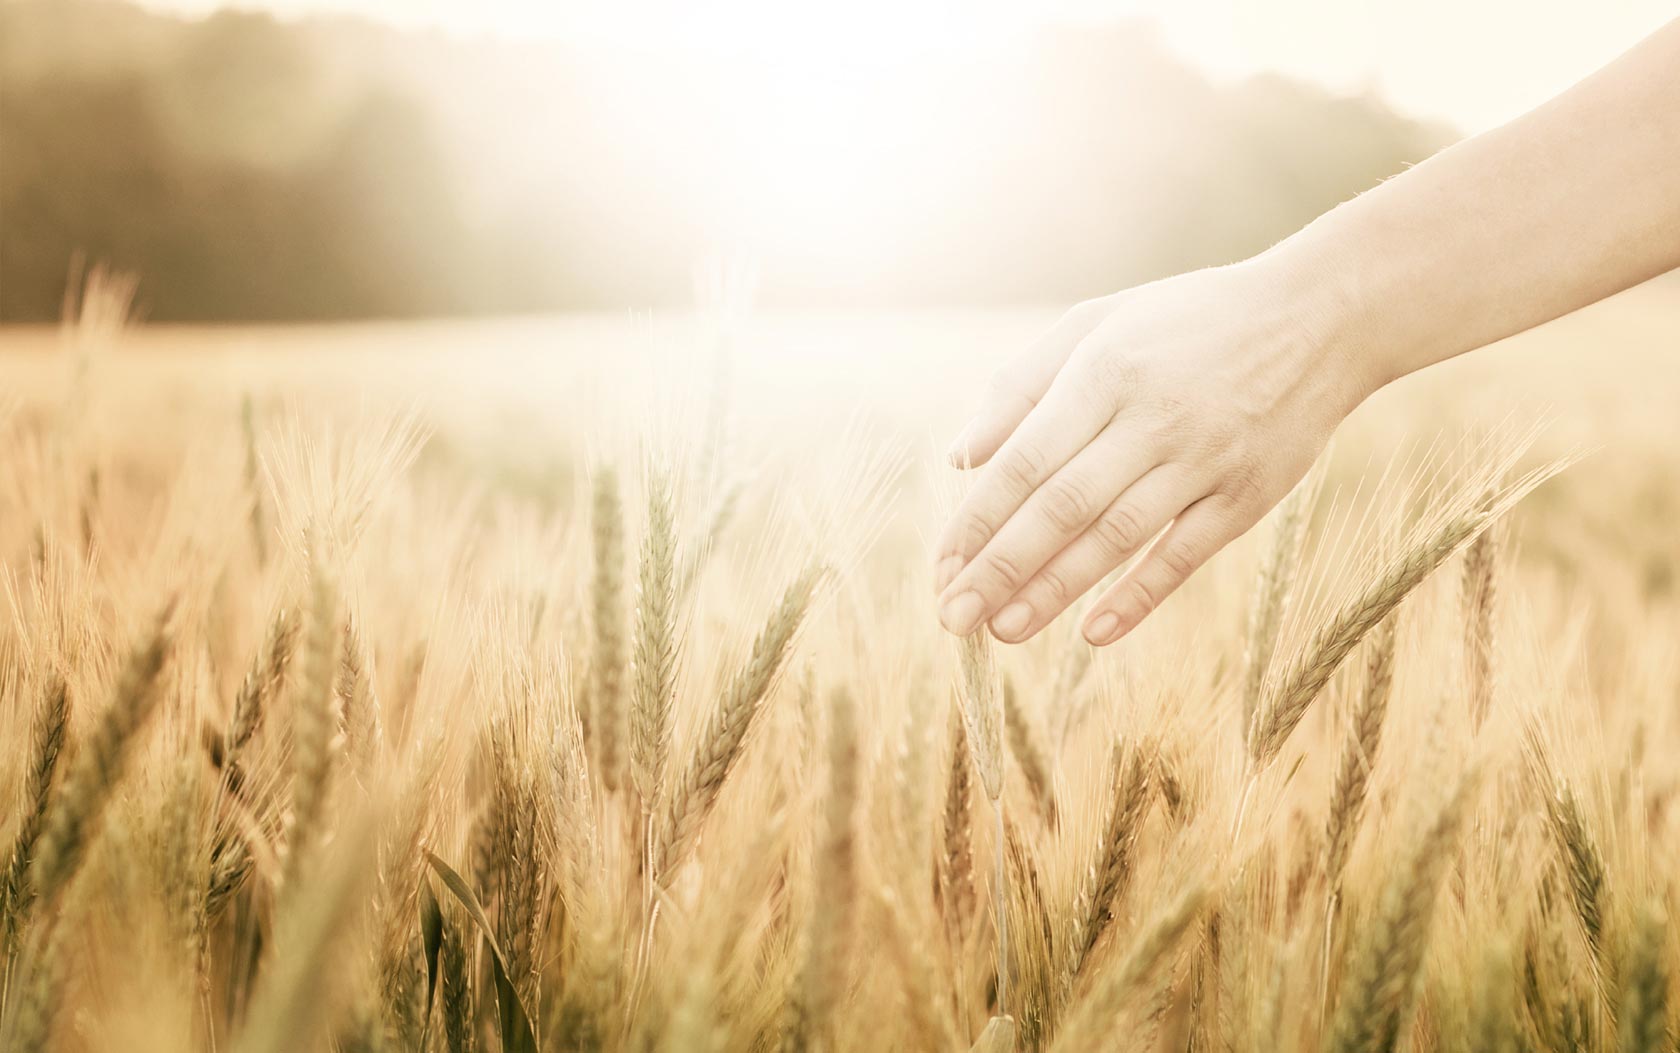 Hand in a field representing online meditation